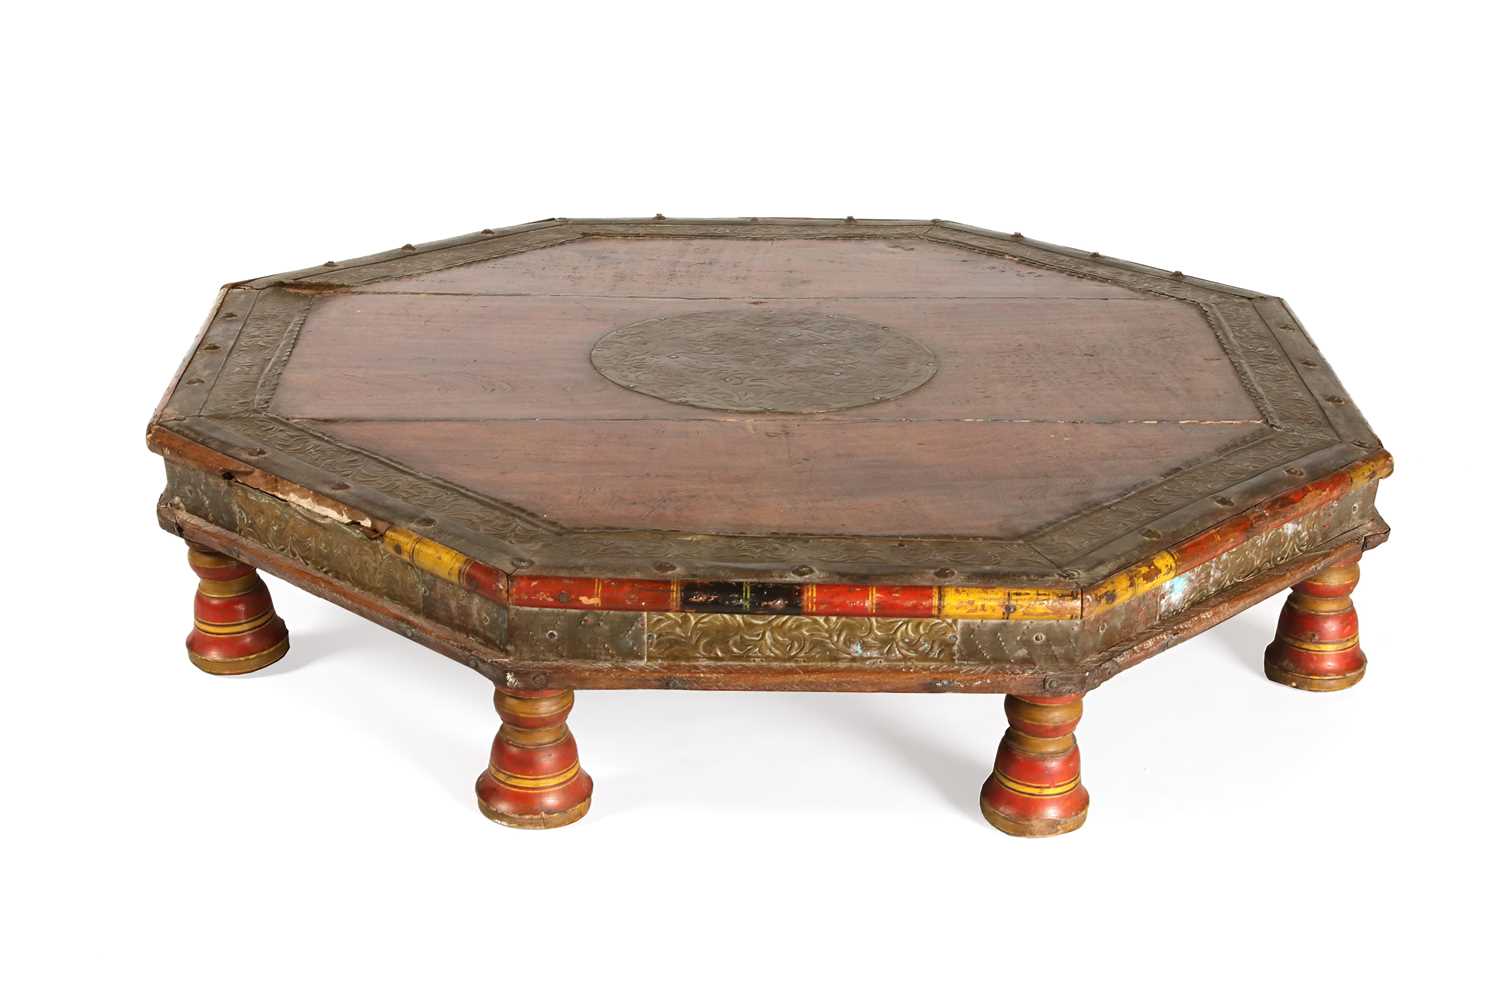 Lot 51 - Indian Wood and Brass Mounted Low Table